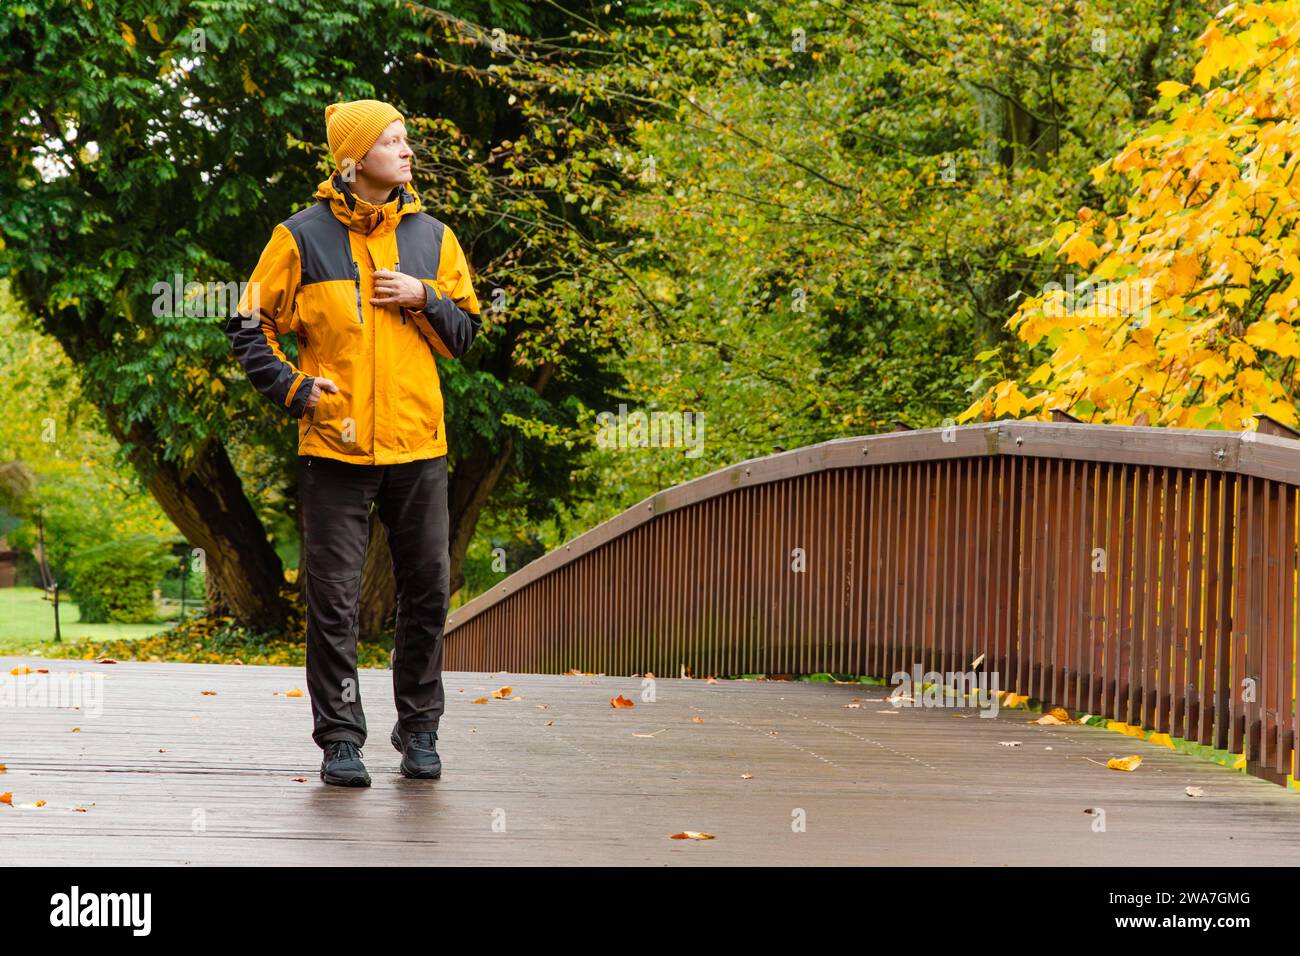 Autumn, bridge and a man in a yellow jacket. Stock Photo